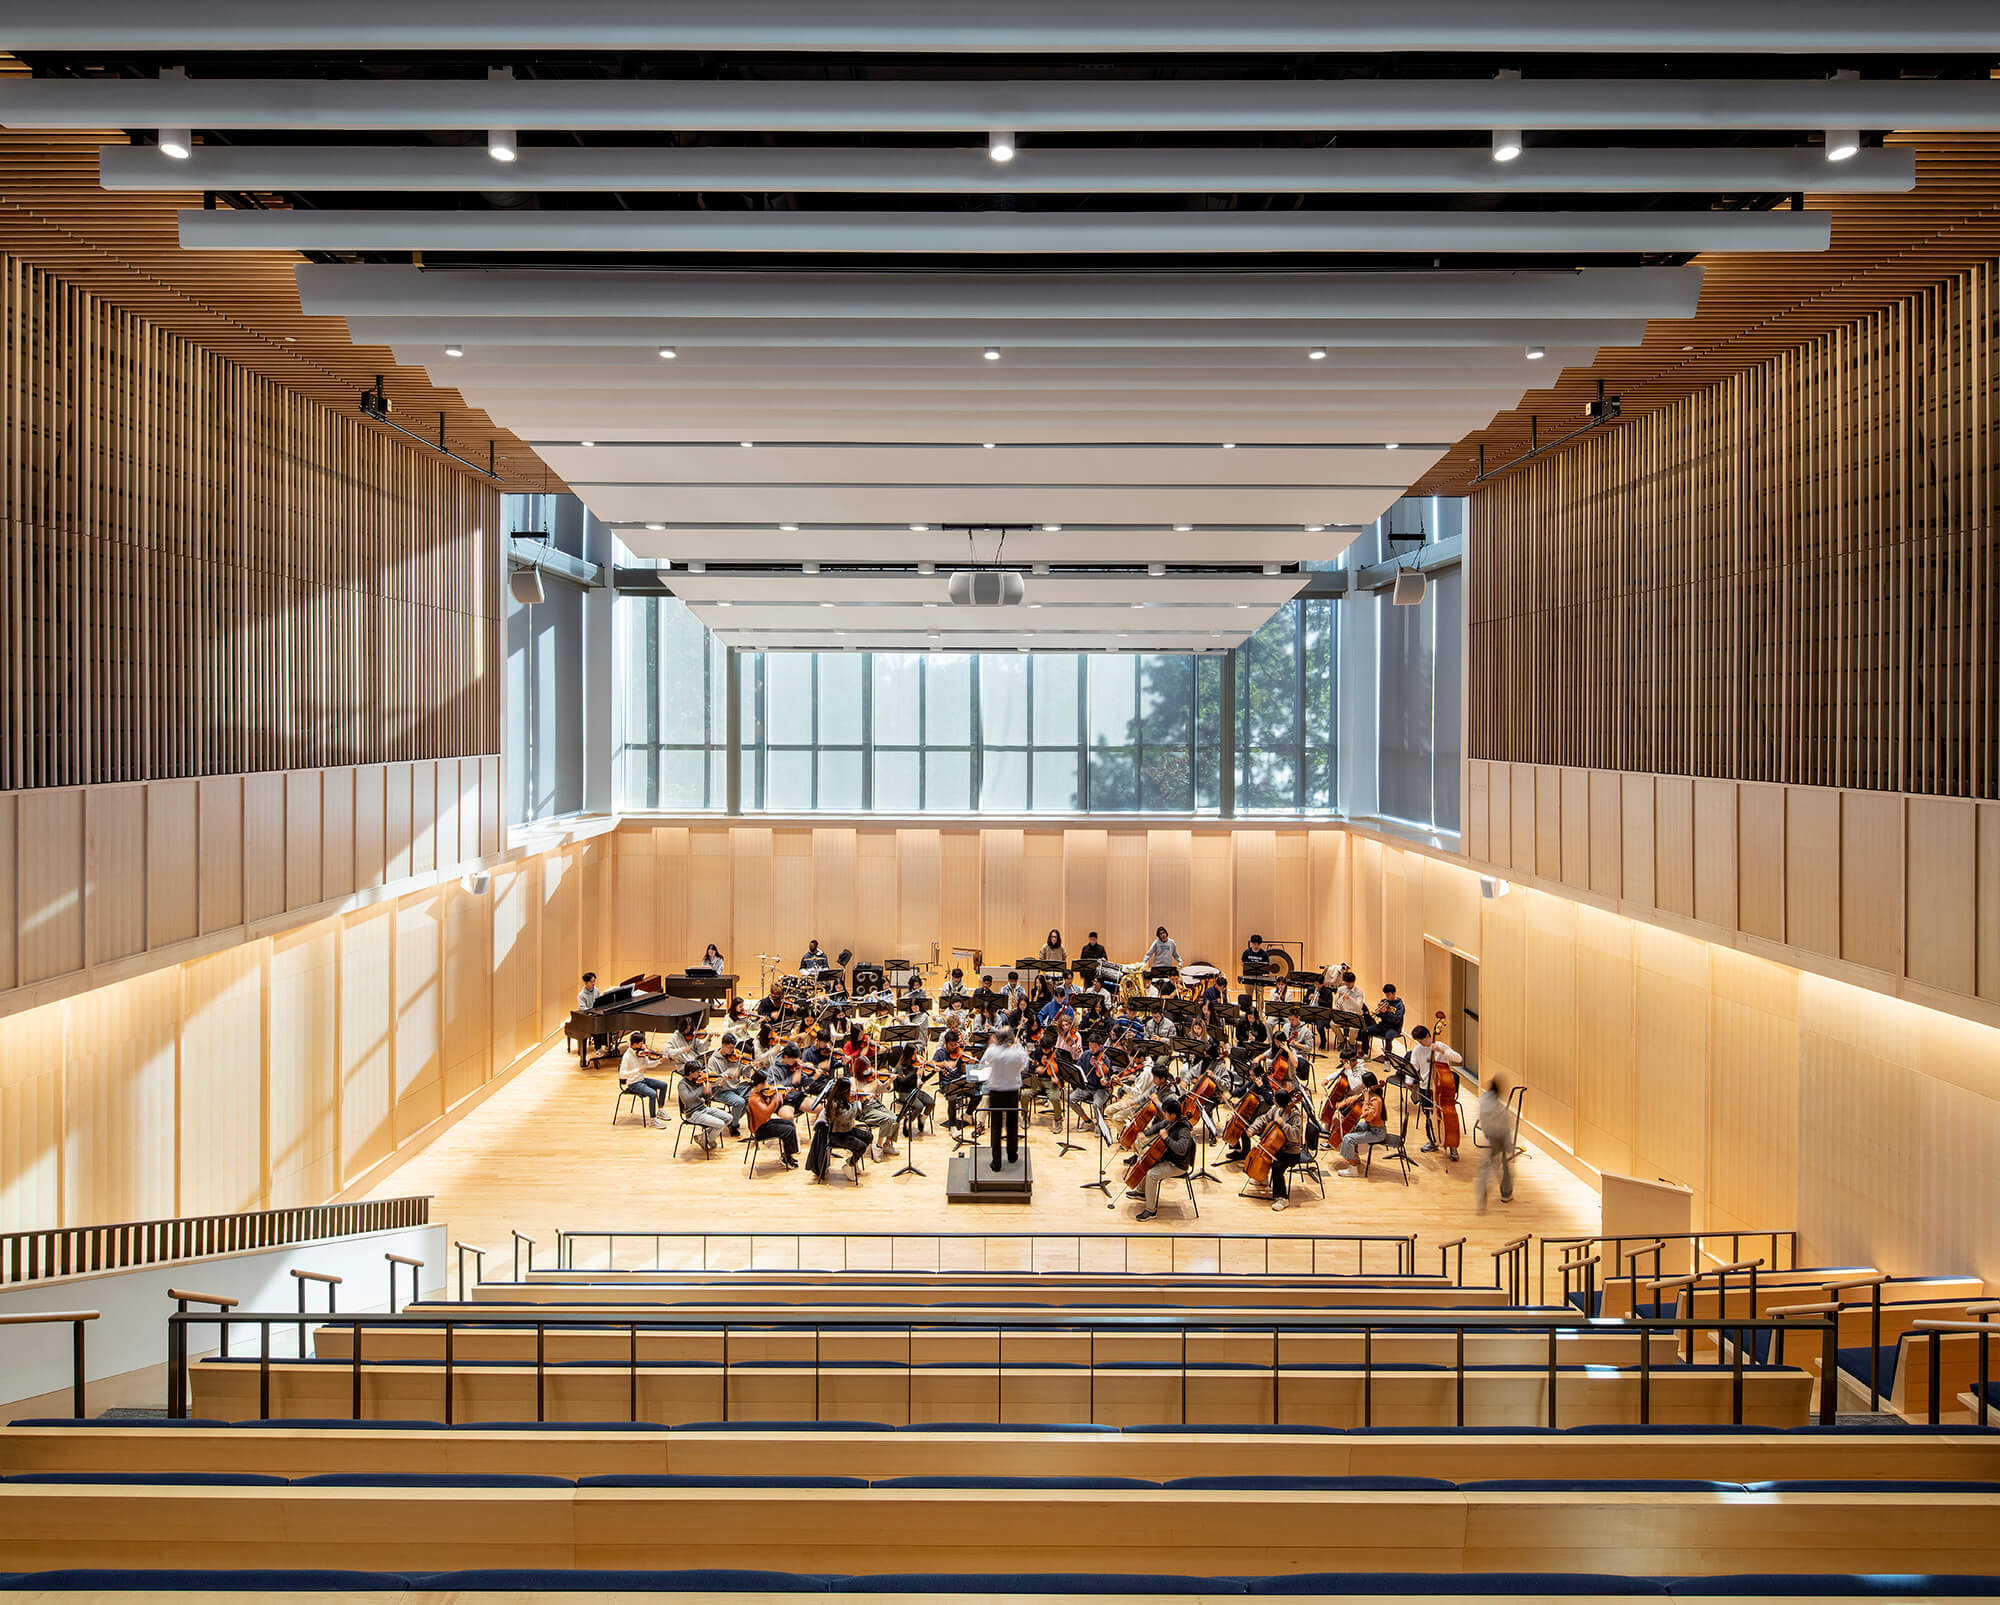 Peddie students perform in the new Ding Music Hall.